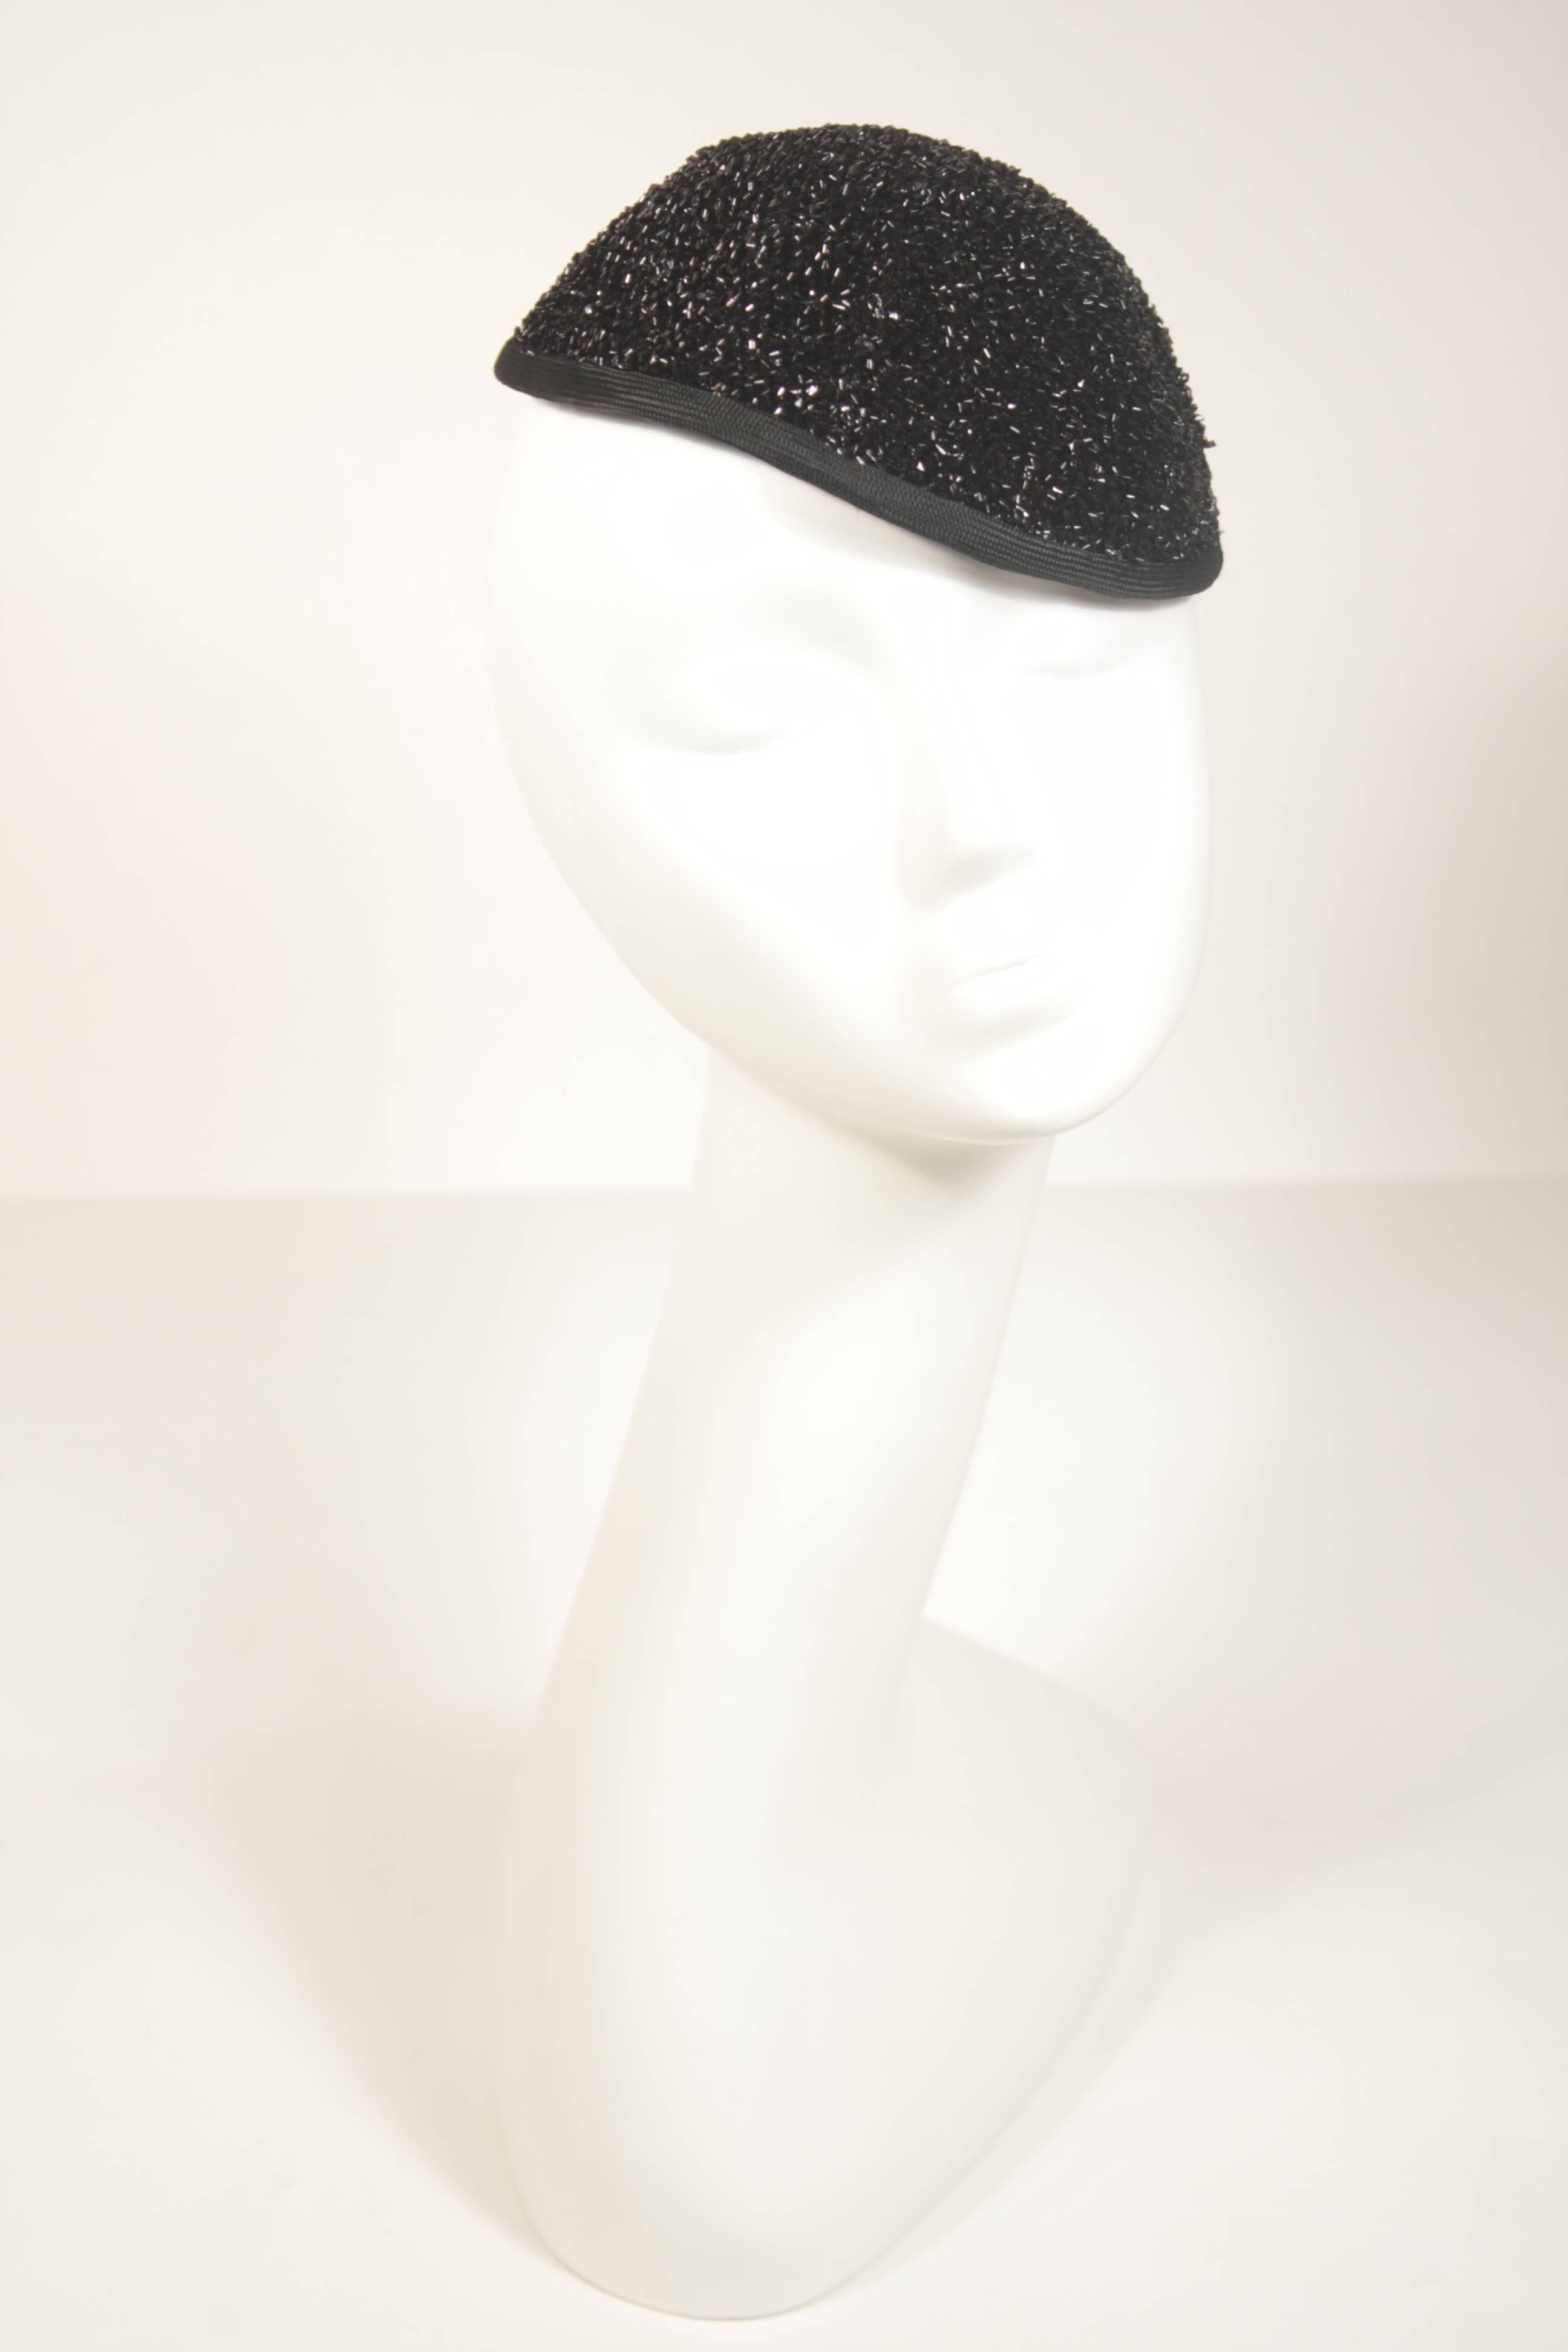 This YSL  hat is composed of a shiny reflective material with a skull cap style. In good vintage condition.

  **Please cross-reference measurements for personal accuracy. 

Measurements (Approximately)  
Circumference: 20 3/8